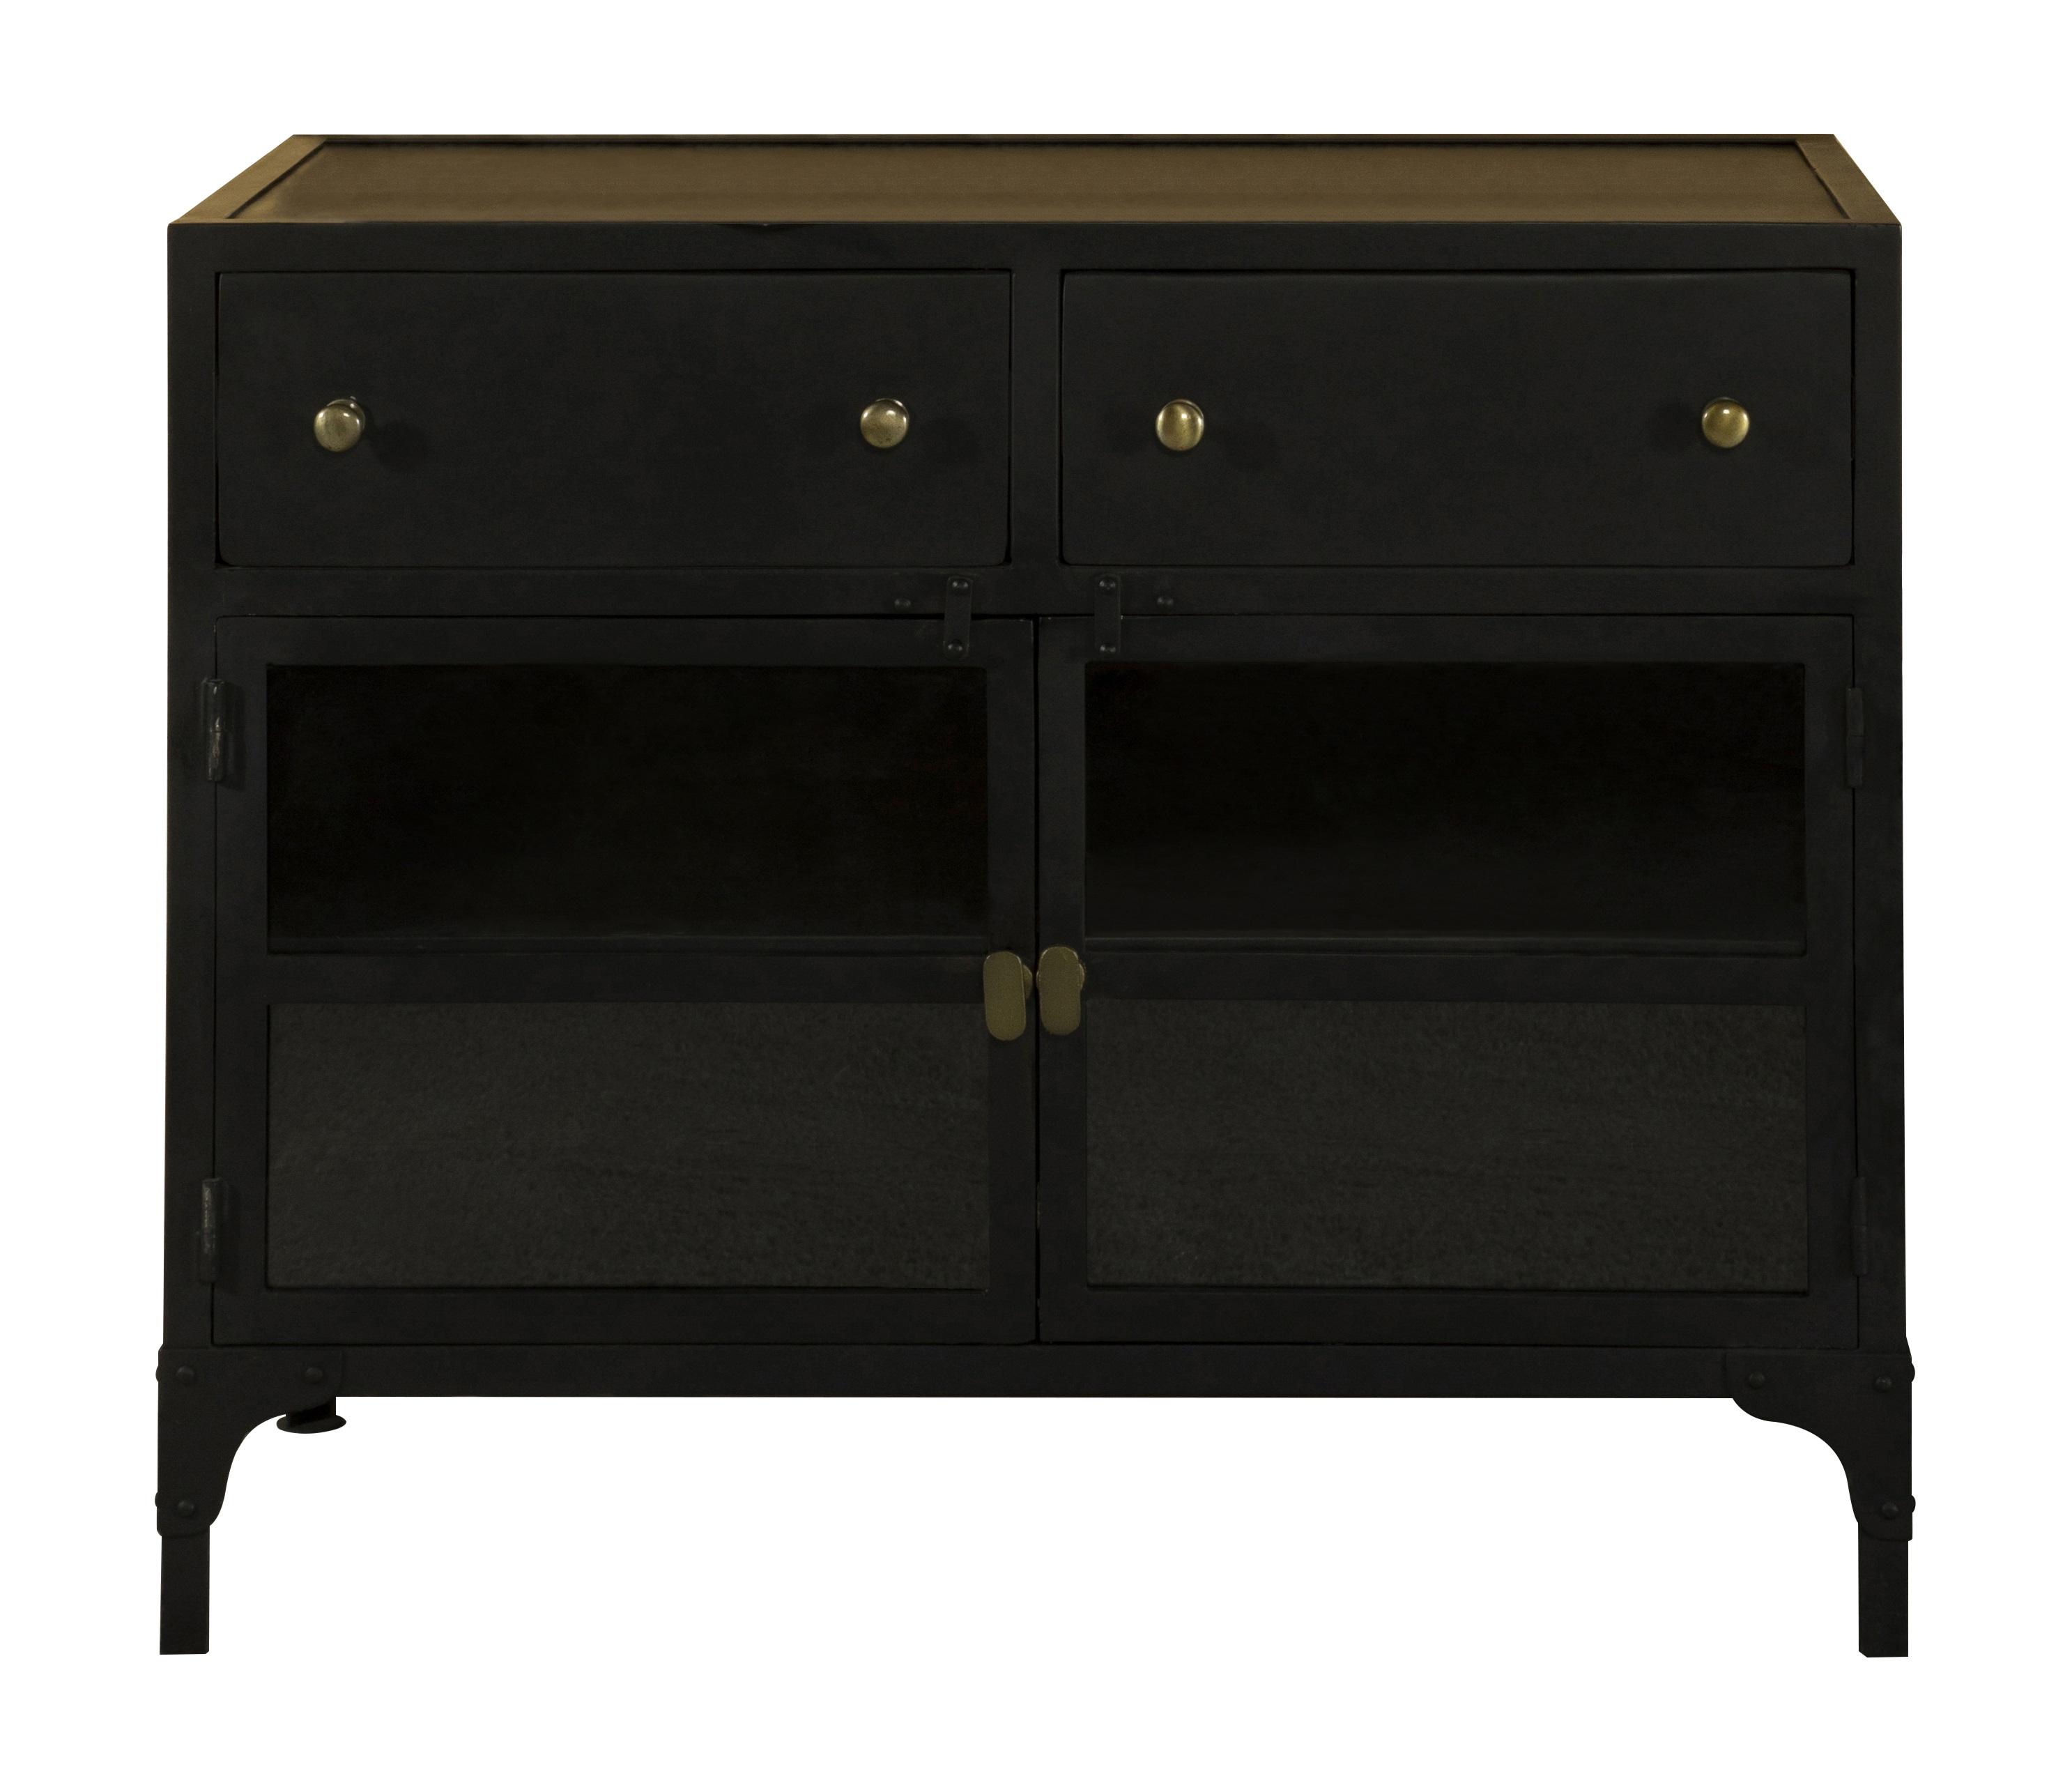 Modern Accent Cabinet 951761 951761 in Black 